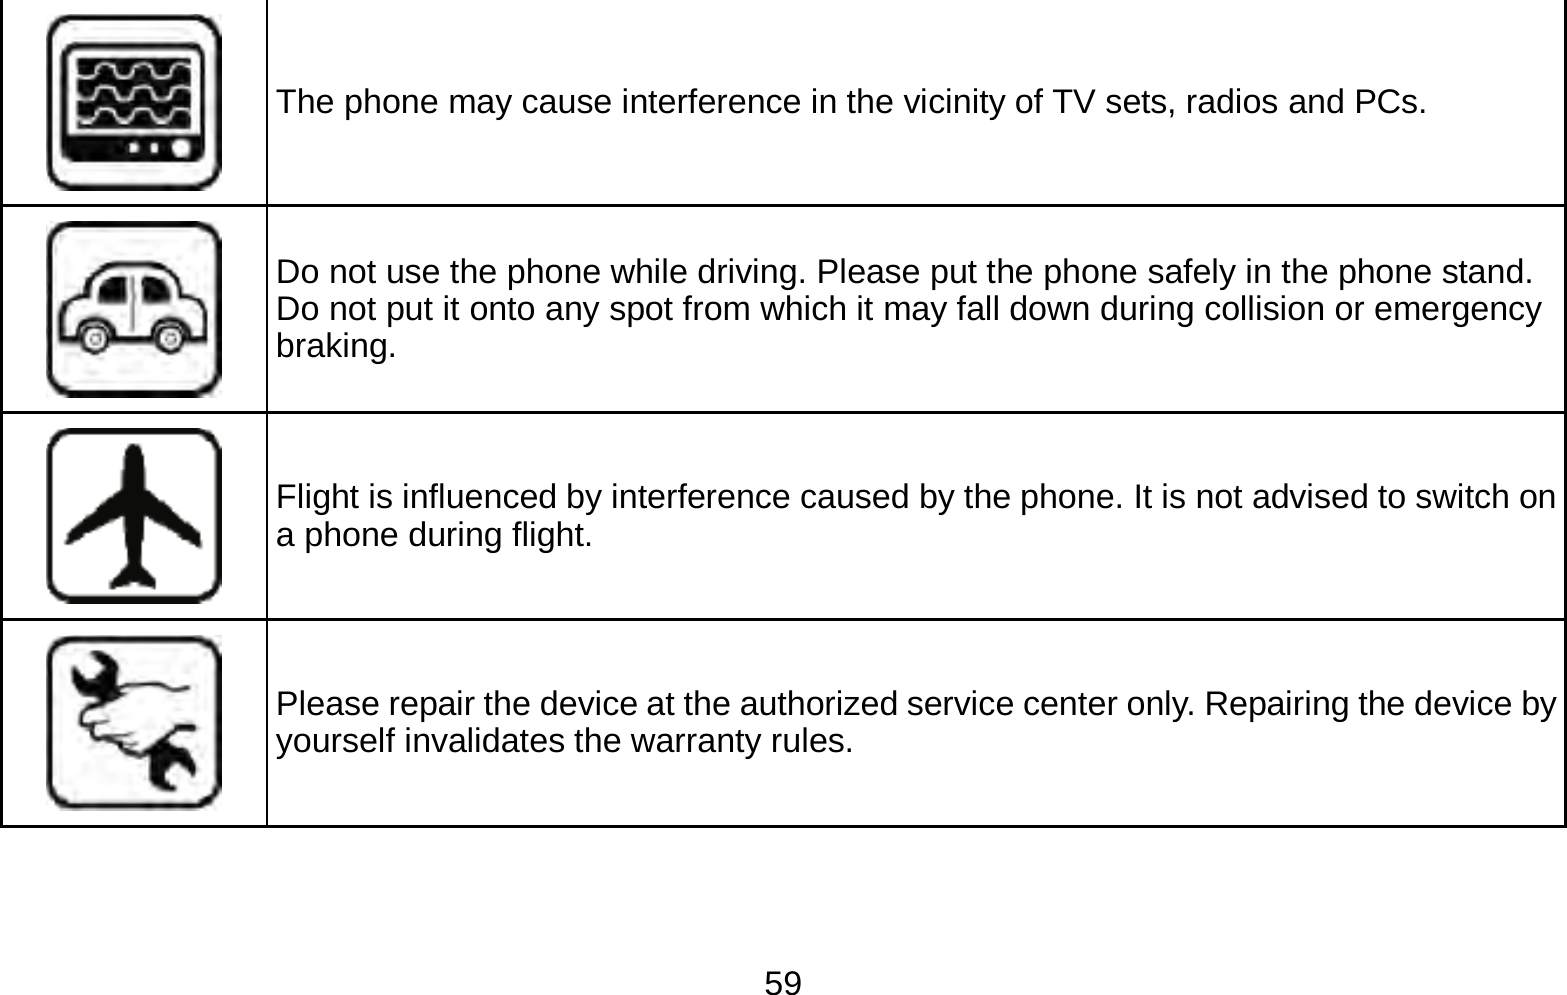   59 The phone may cause interference in the vicinity of TV sets, radios and PCs.  Do not use the phone while driving. Please put the phone safely in the phone stand. Do not put it onto any spot from which it may fall down during collision or emergency braking.  Flight is influenced by interference caused by the phone. It is not advised to switch on a phone during flight.  Please repair the device at the authorized service center only. Repairing the device by yourself invalidates the warranty rules. 